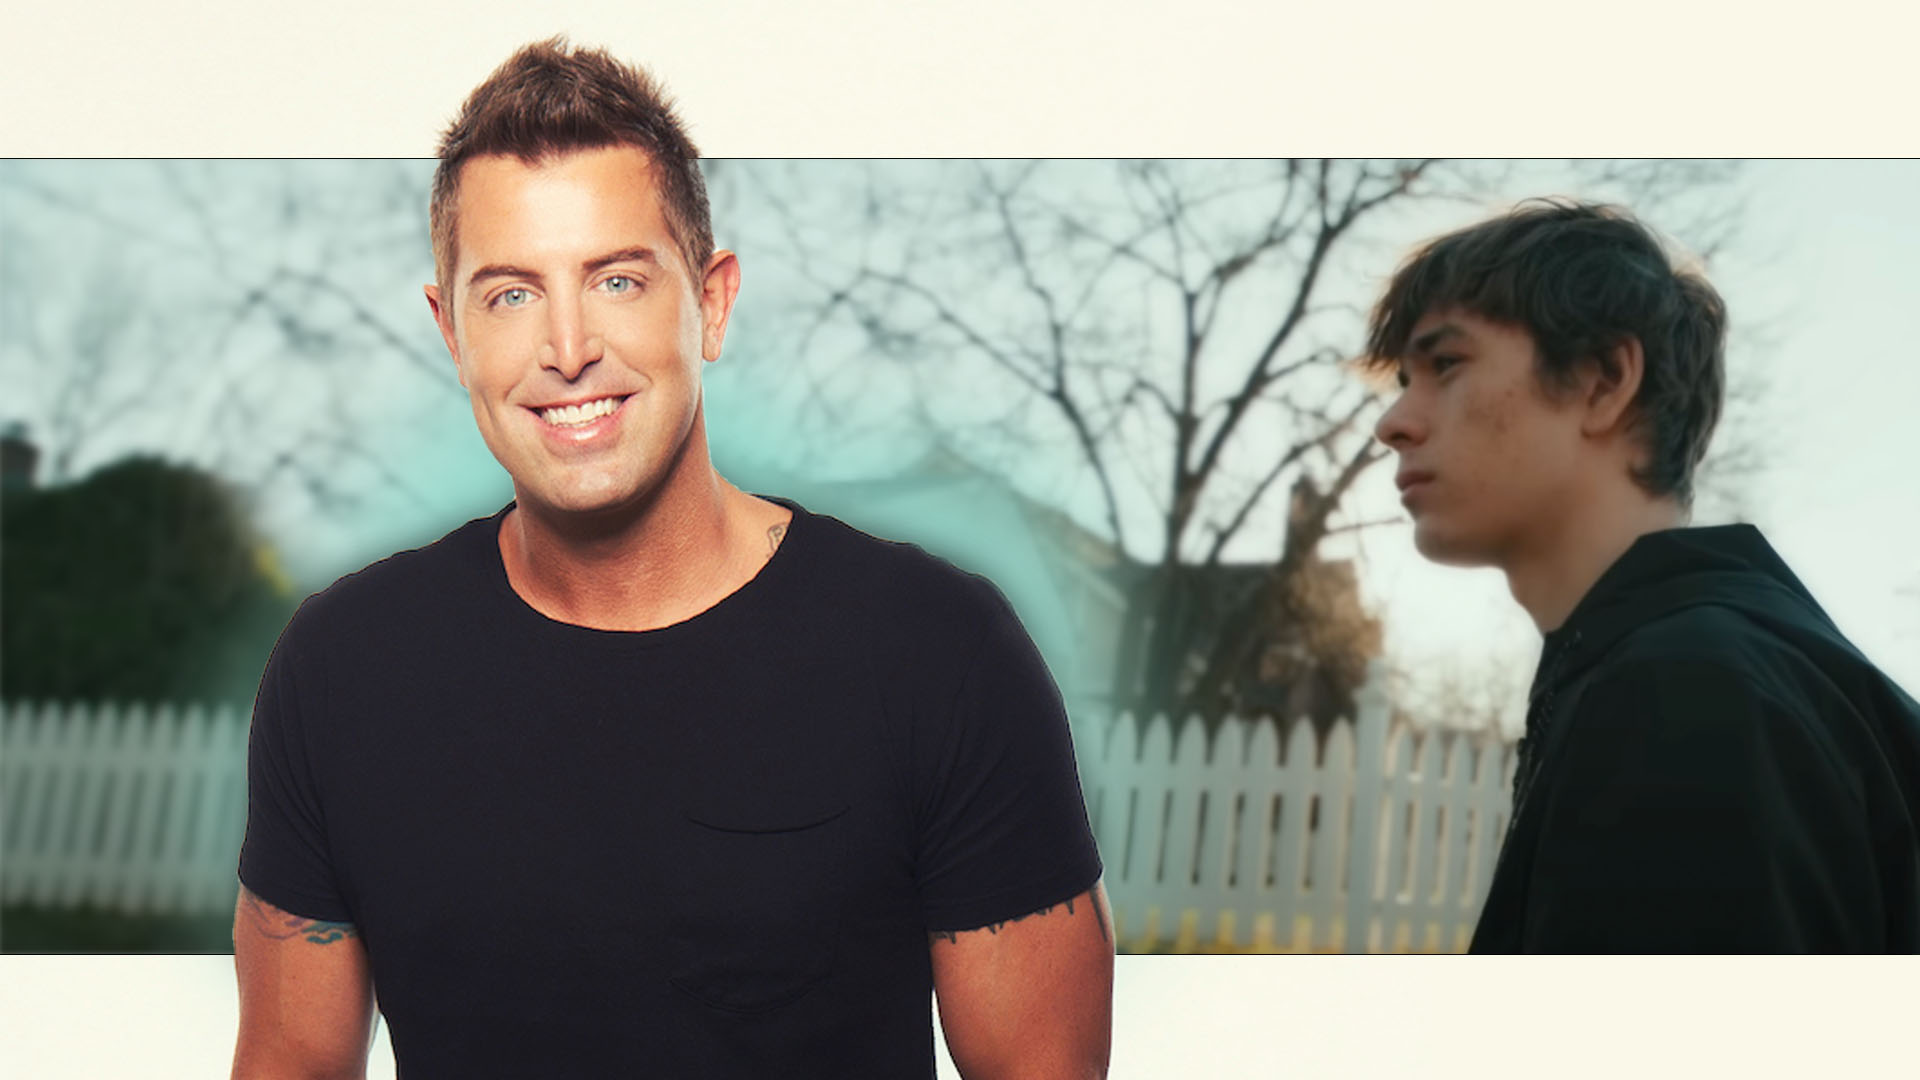 Jeremy Camp's Anxious Heart Music Video Brings Attention to the Teen Mental Health Crisis